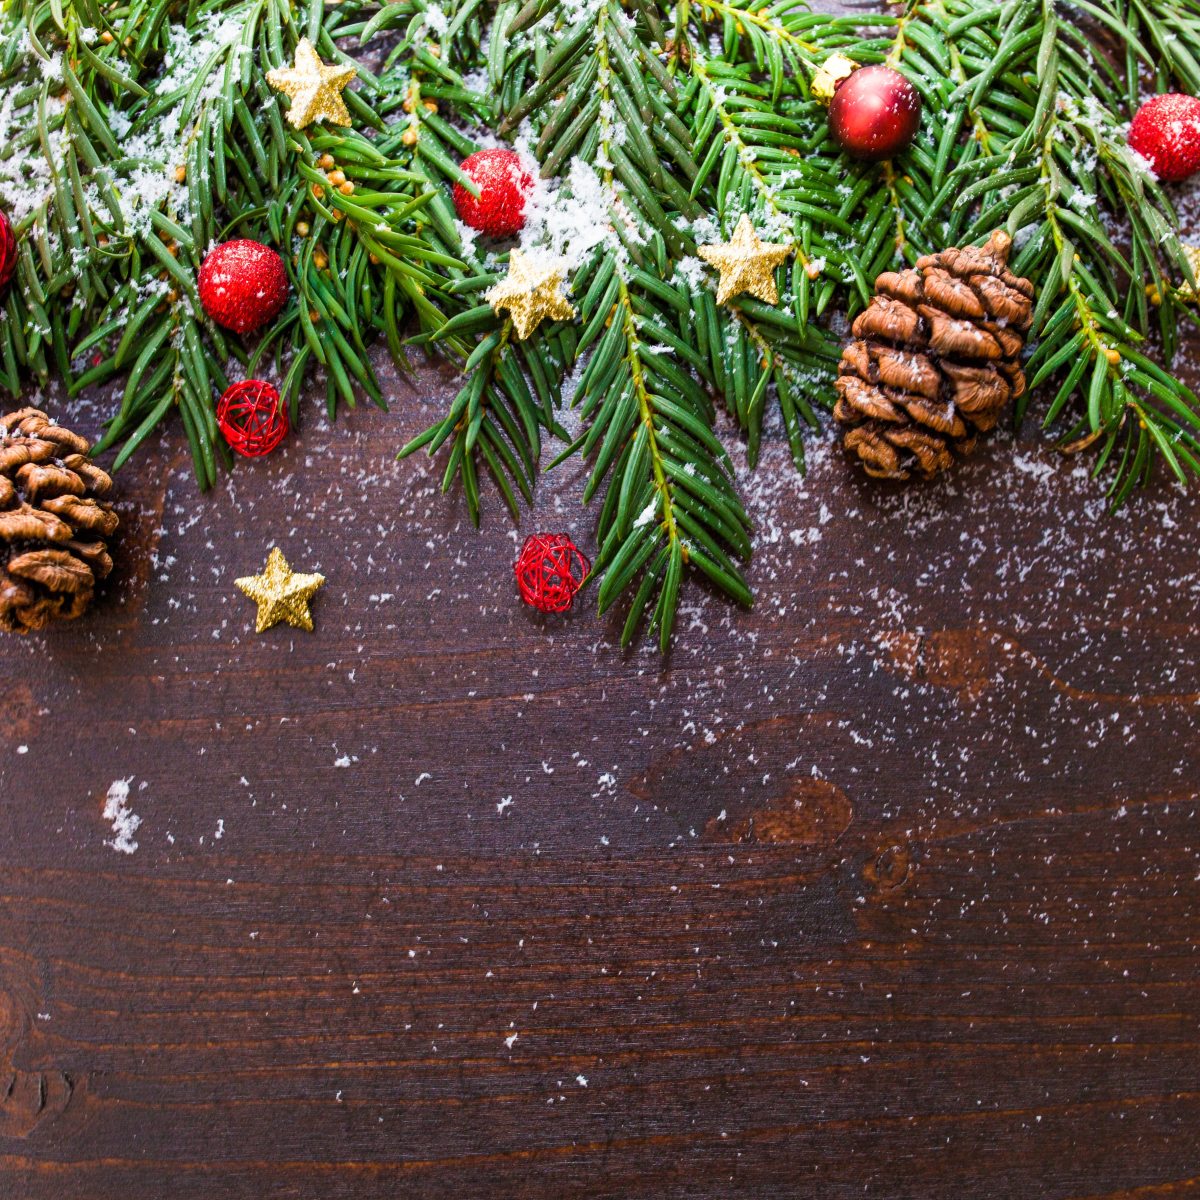 Deck the Stalls with Boughs of Holly: Holiday Safety Tips For Decorating Your Barns and Stalls